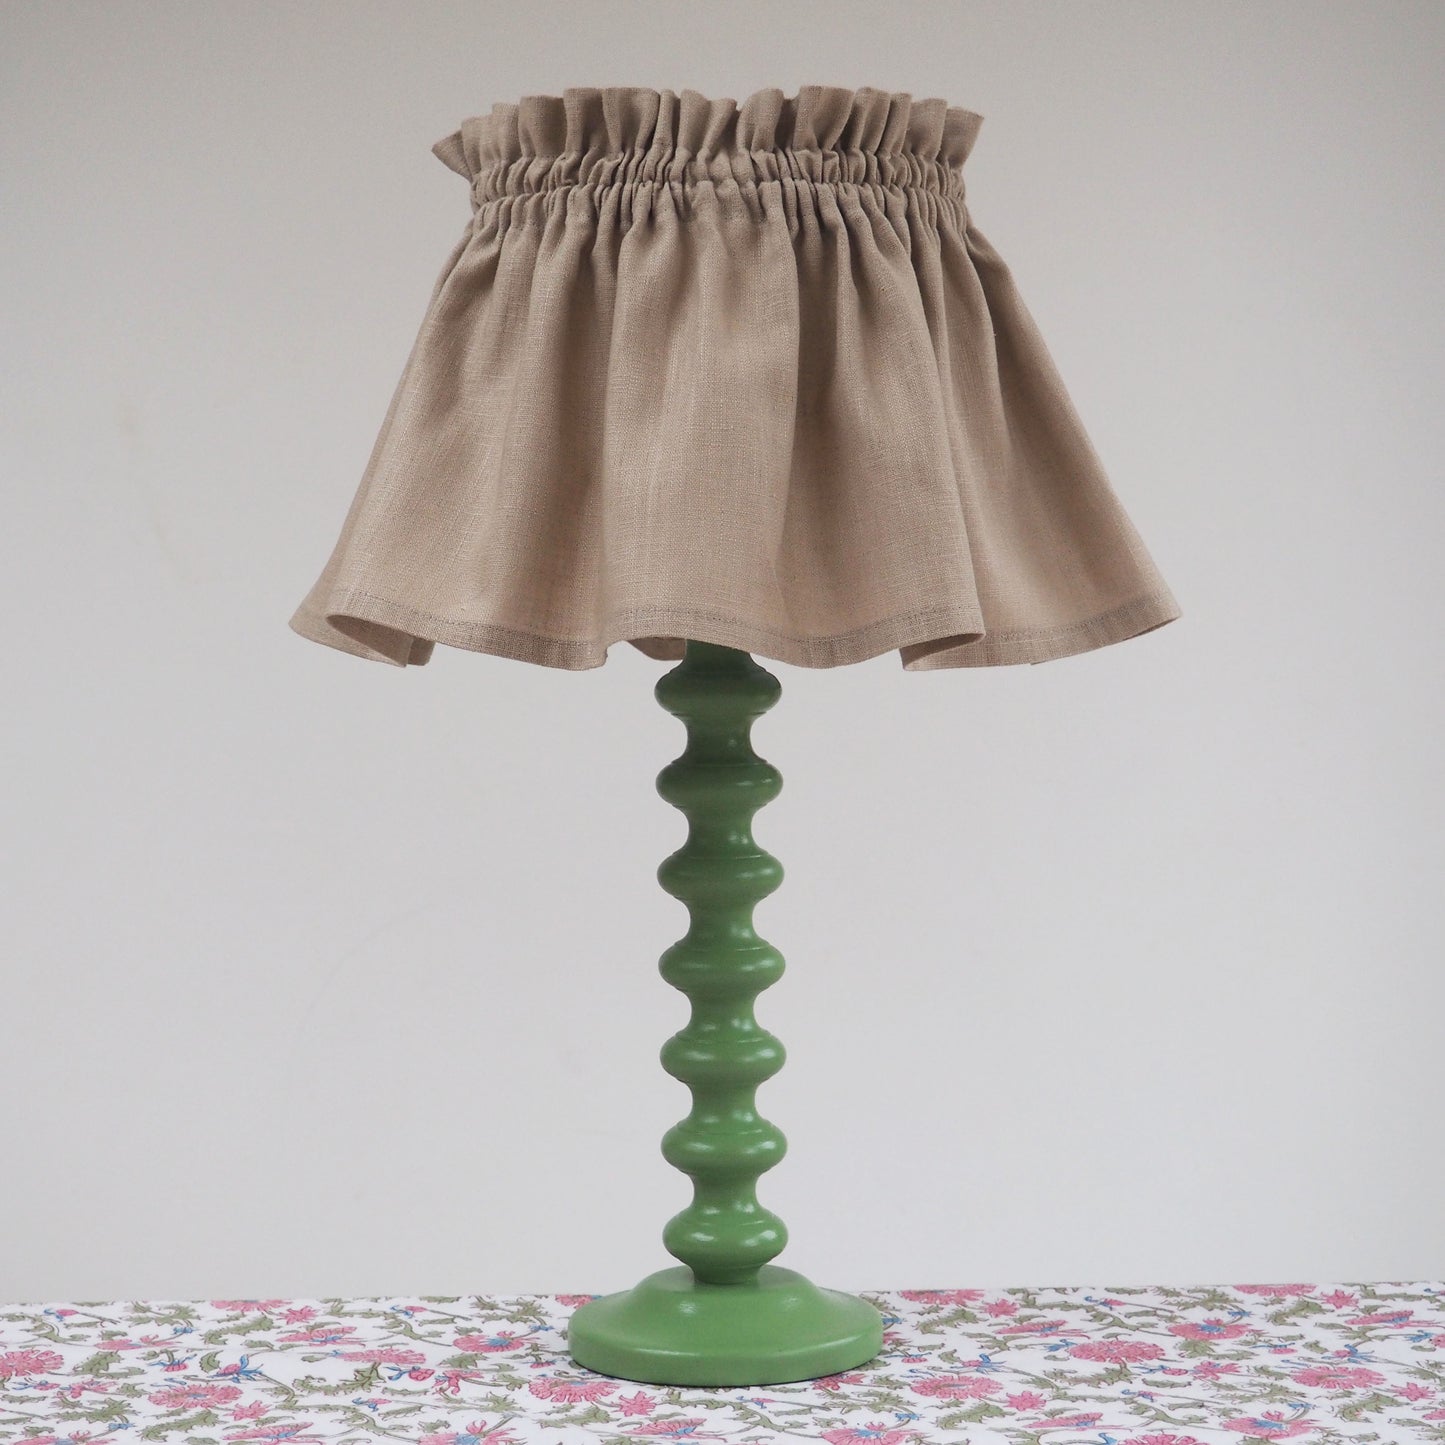 MEDIUM scrunchie 100% linen natural fabric loose lampshade cover